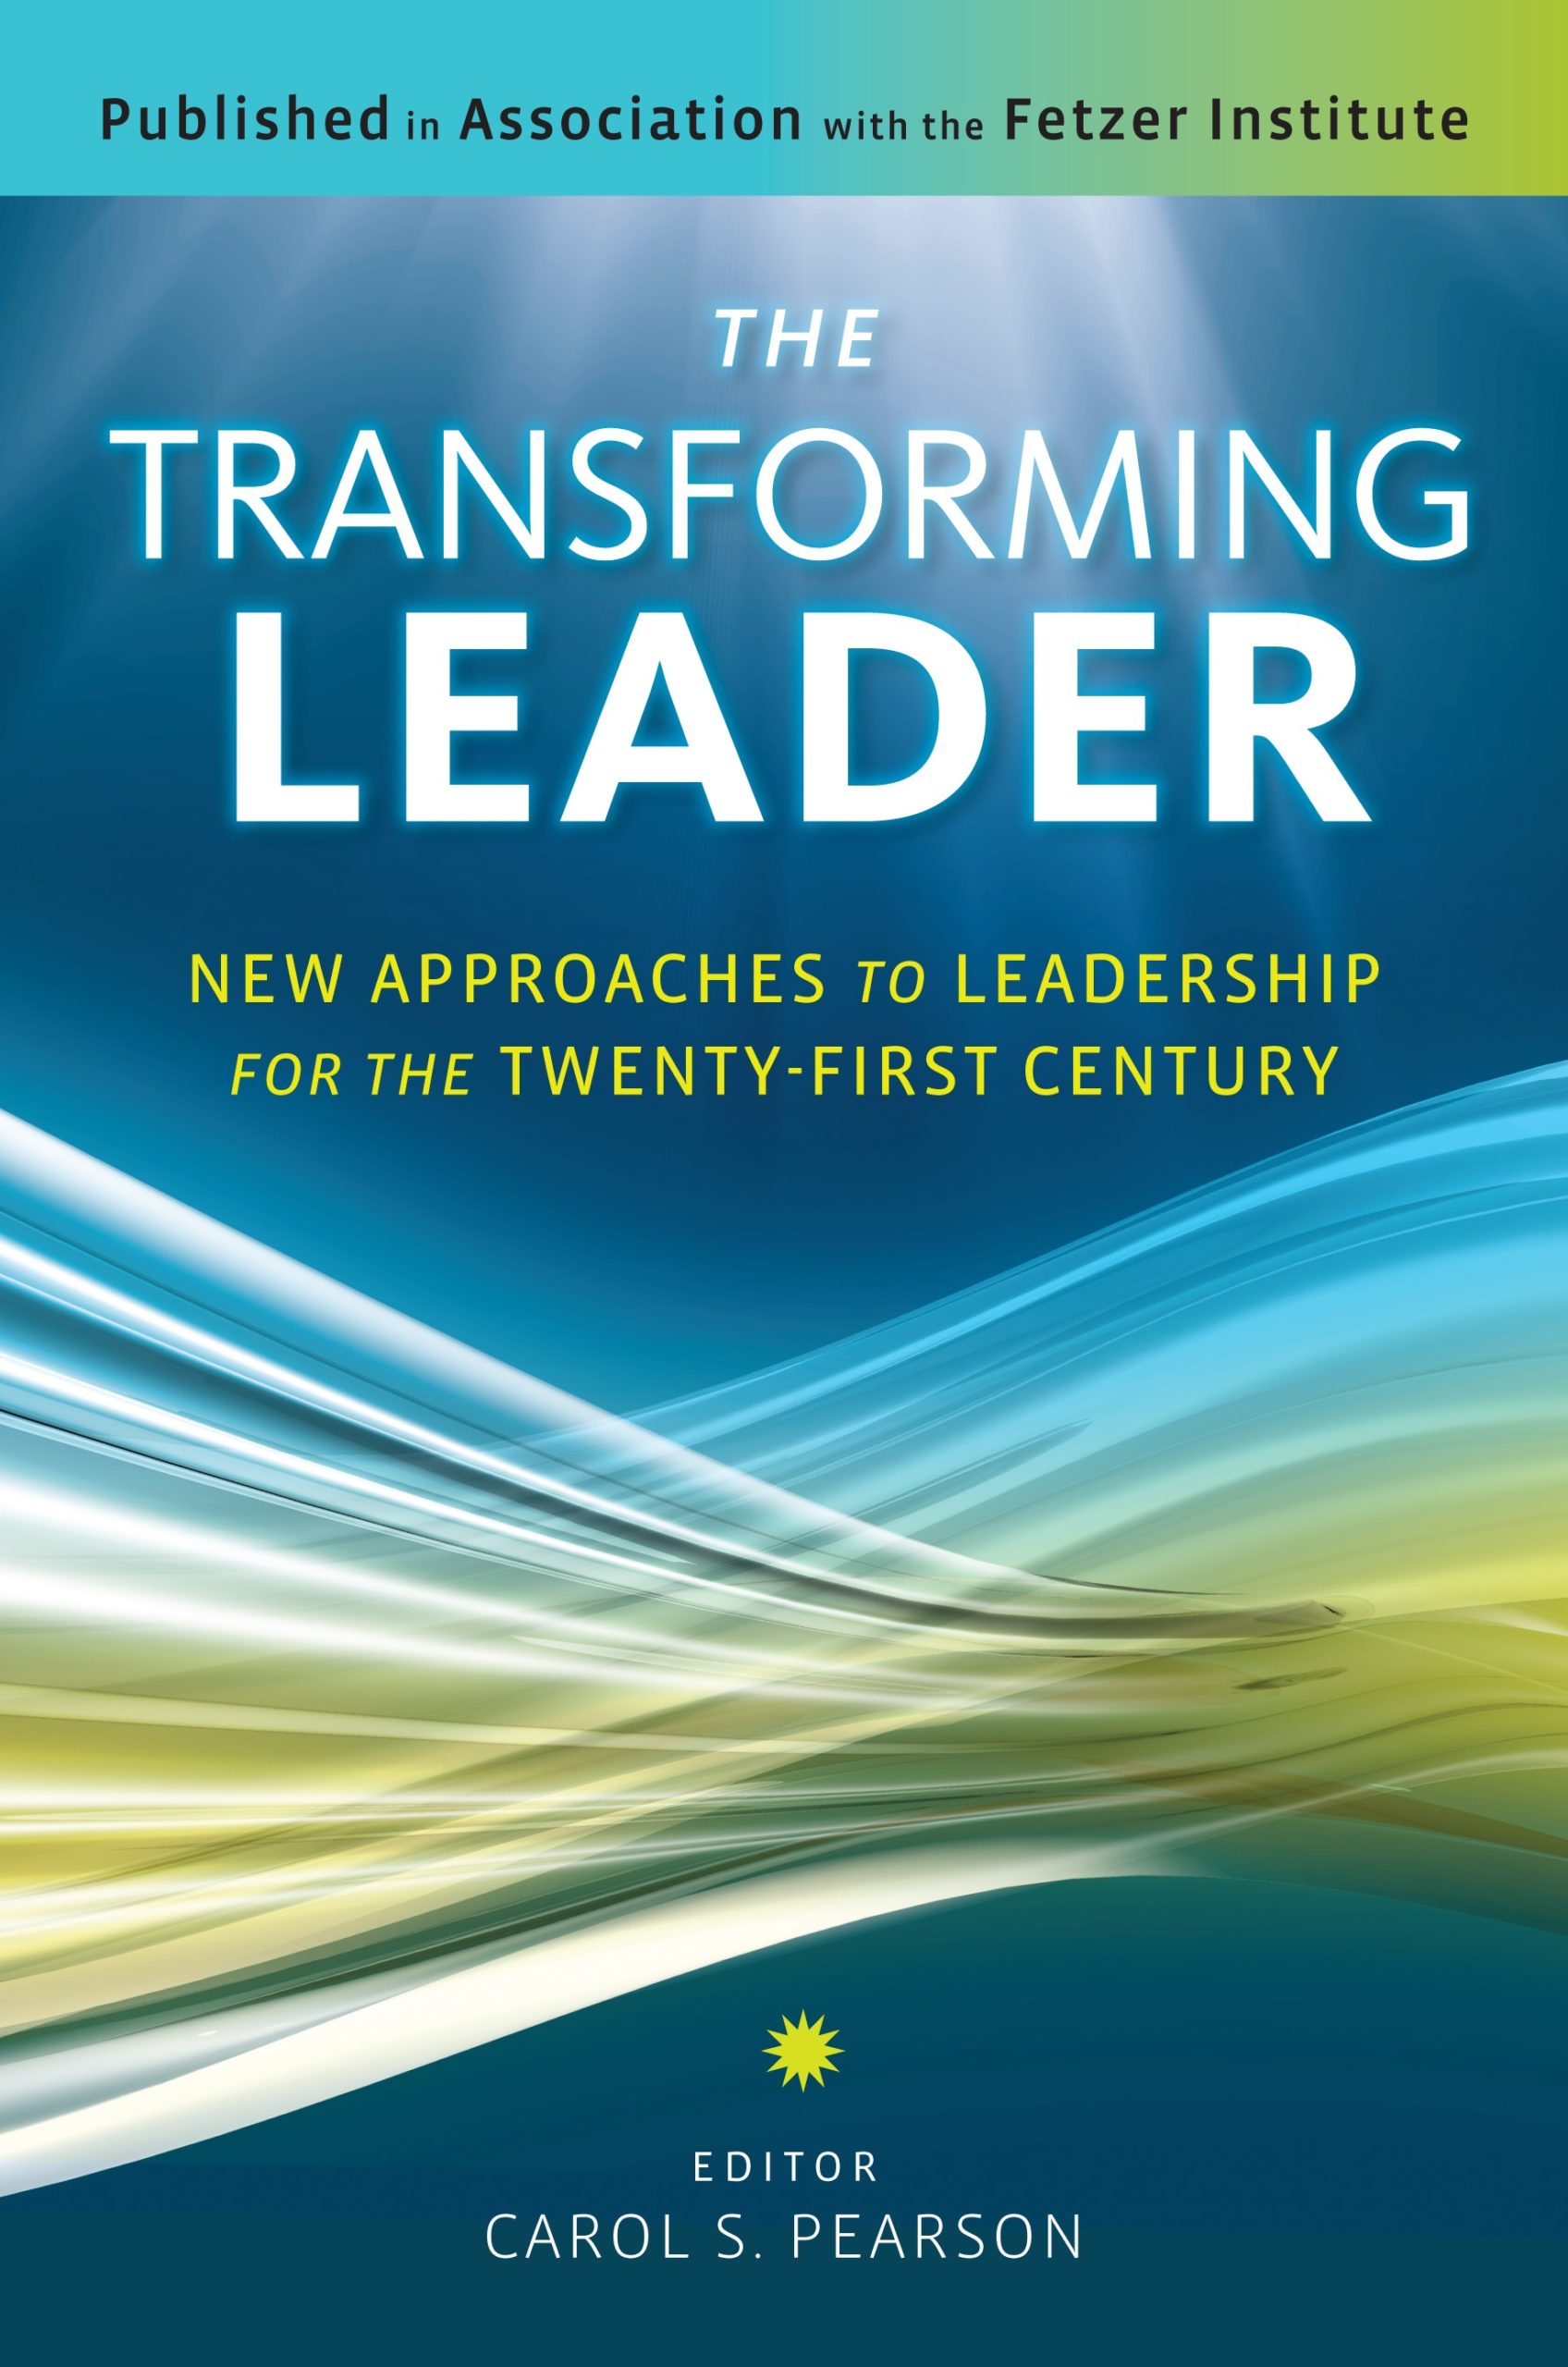 The Transforming Leader bookcover